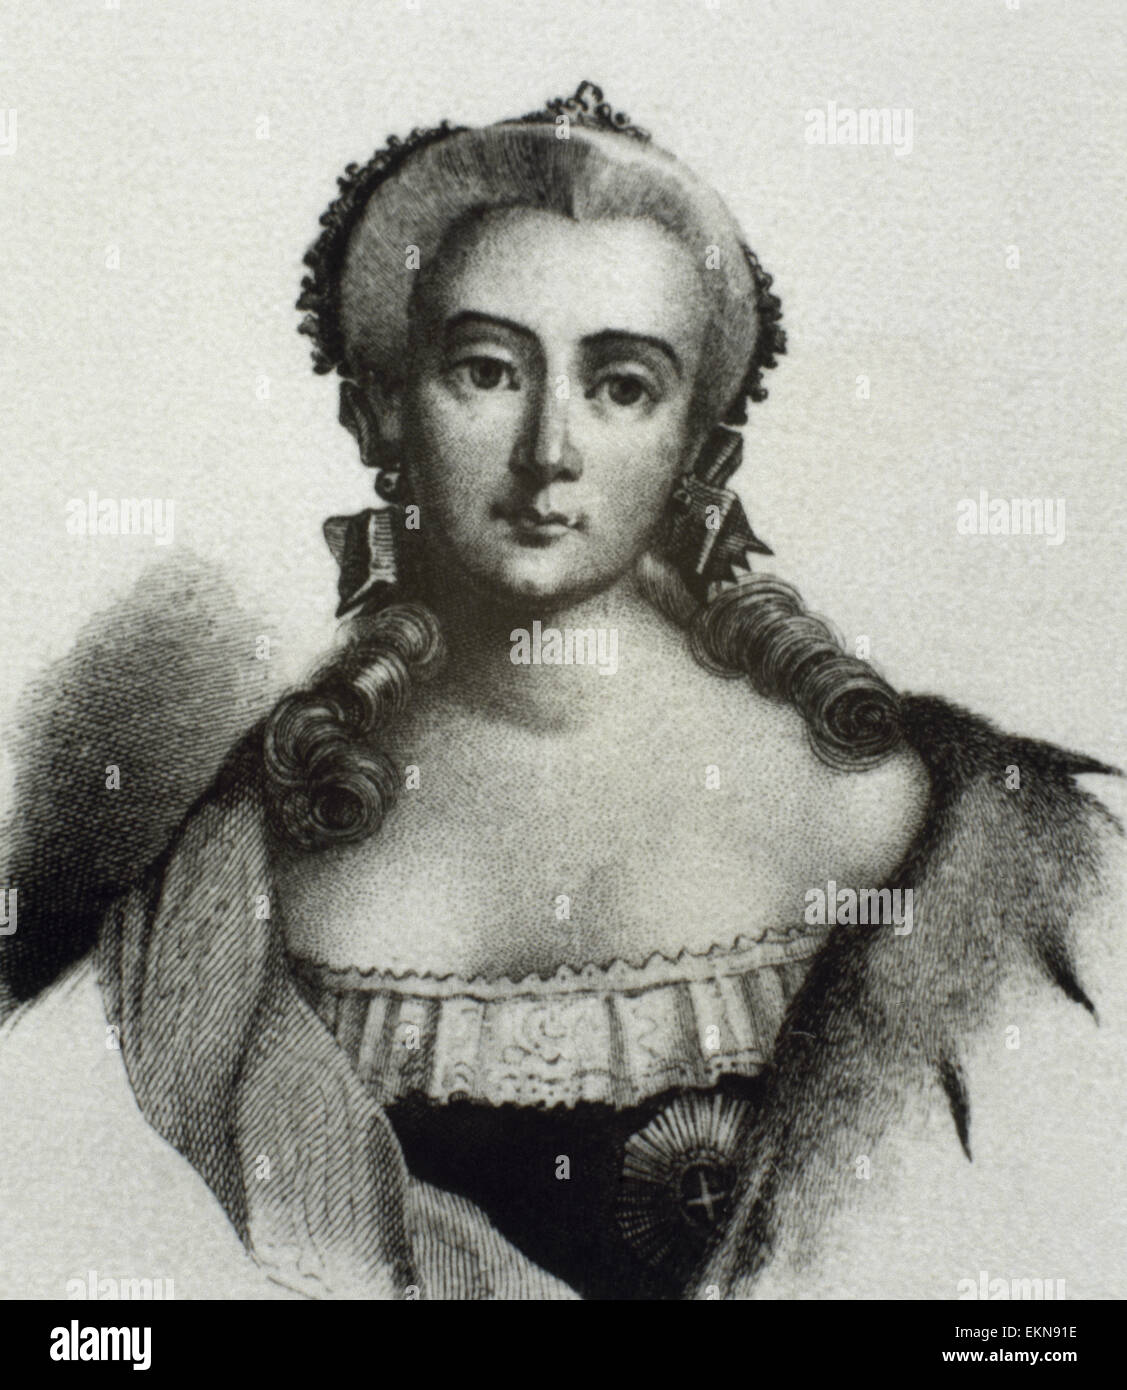 Elisabeth of Russia (1709-1762). Empress of Russia. House of Romanov. Portrait. Engraving. Stock Photo